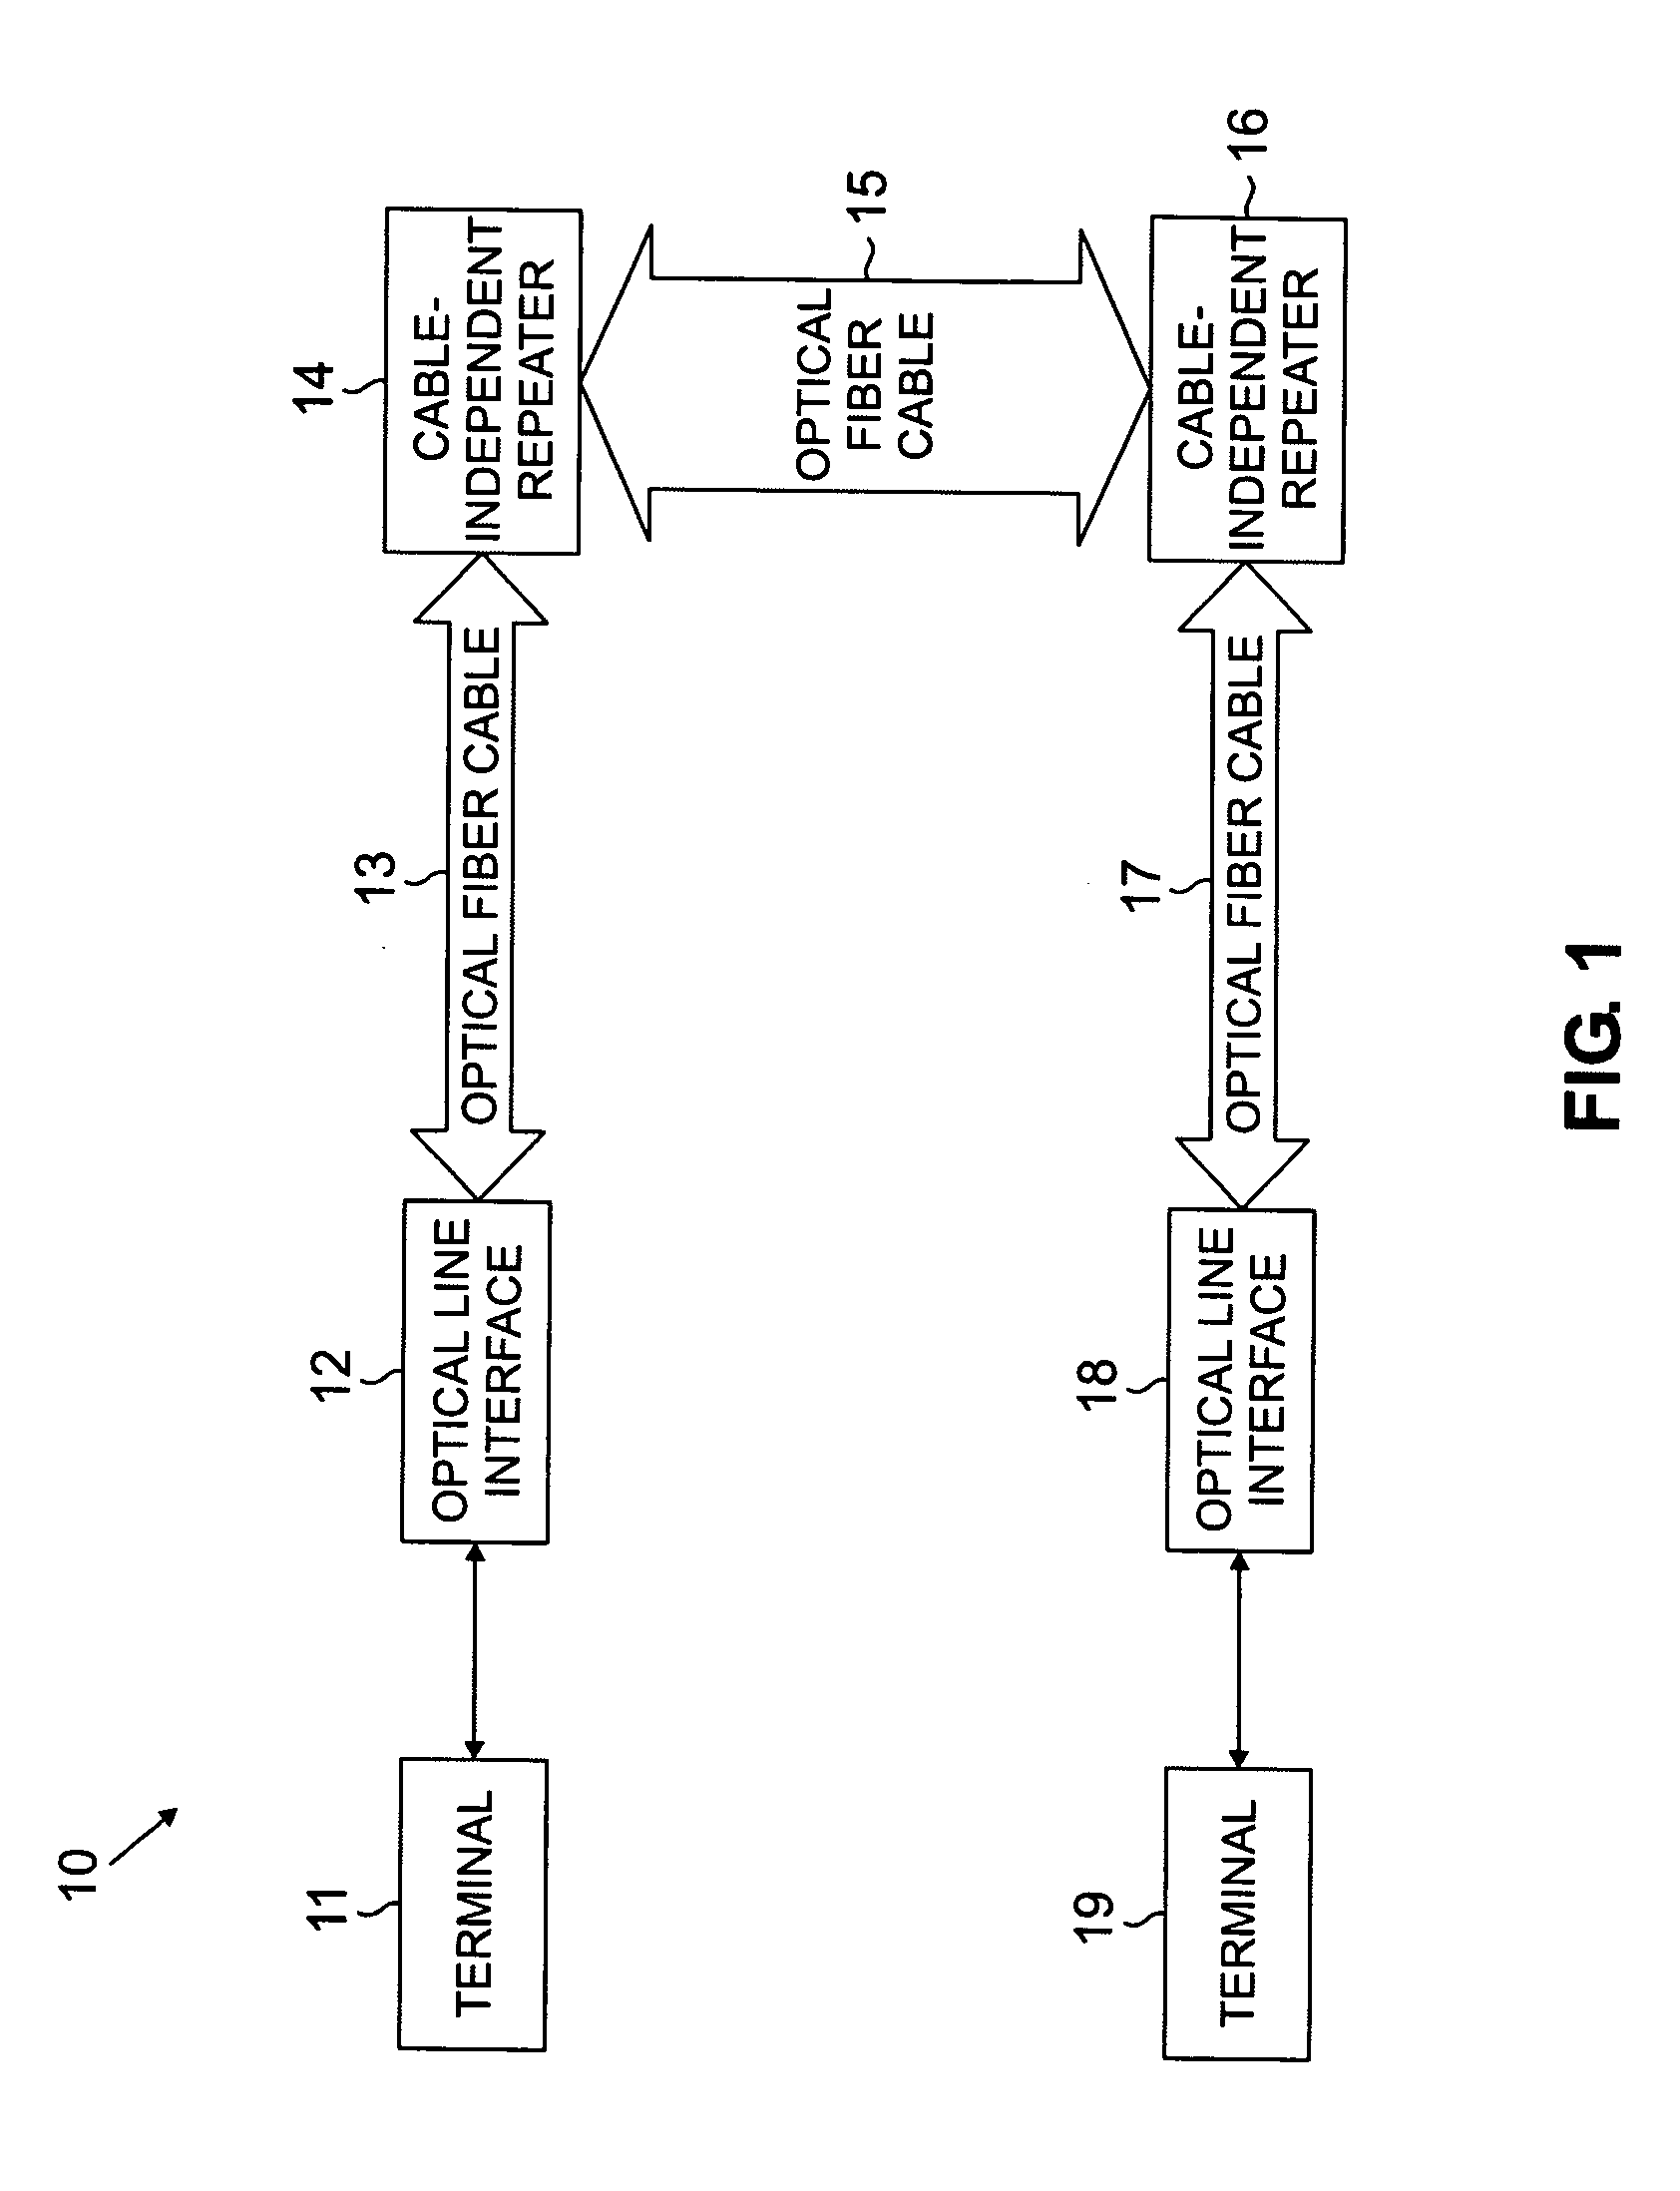 Submarine optical transmission systems having optical amplifiers of unitary design